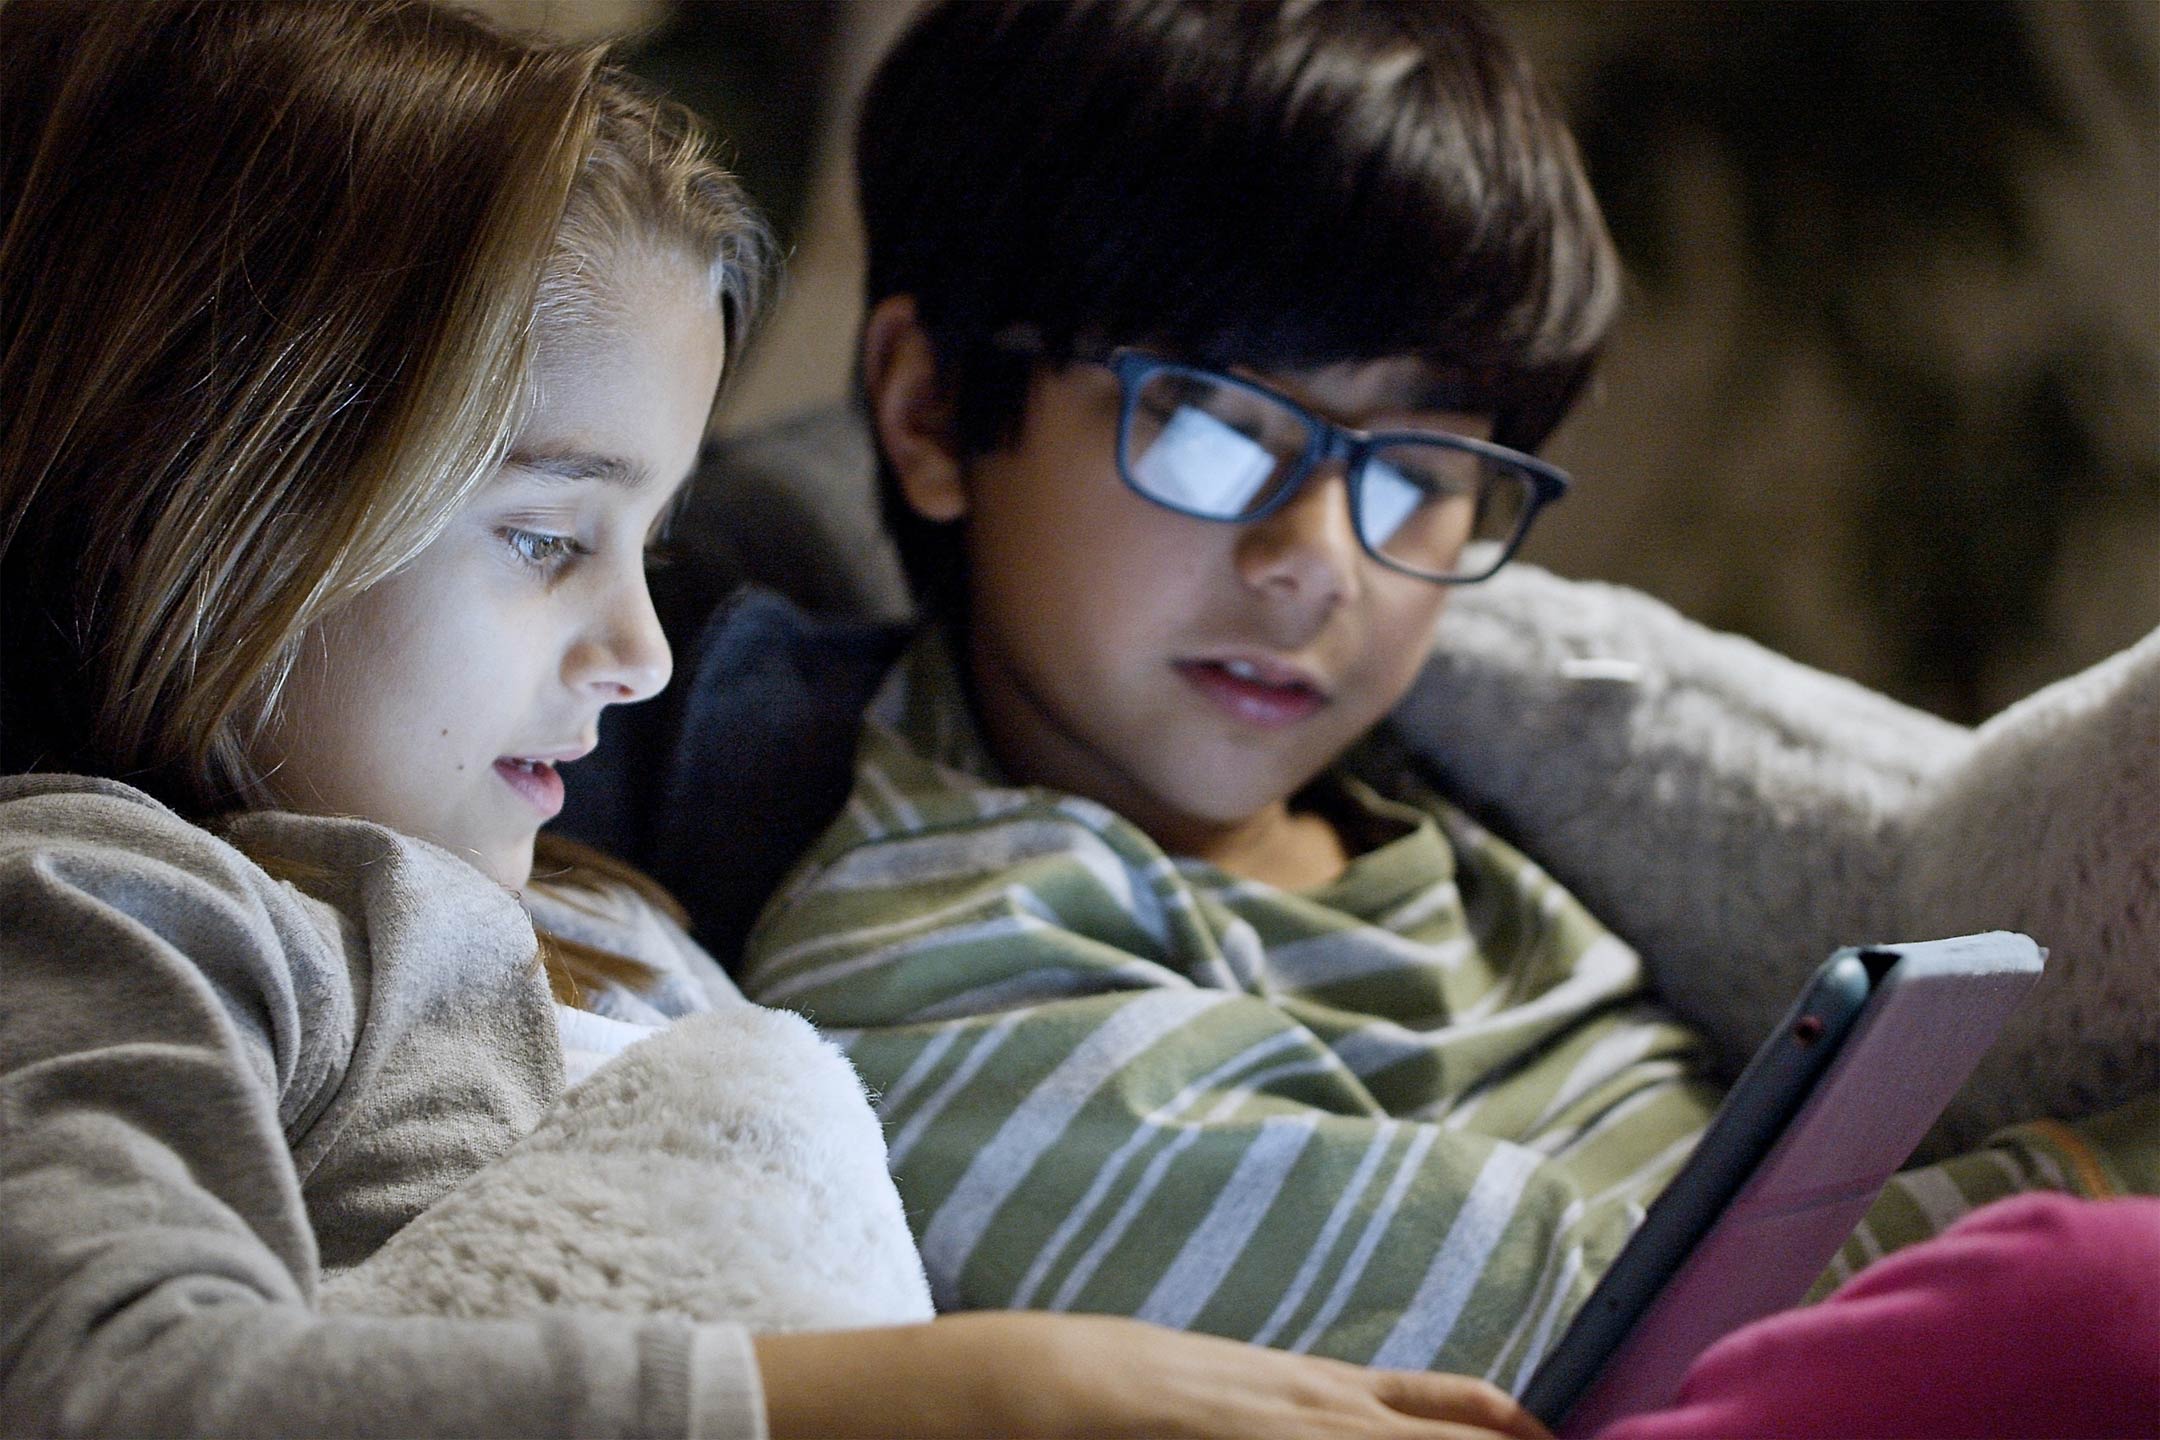 two-kids-looking-at-tablet-at-night2160